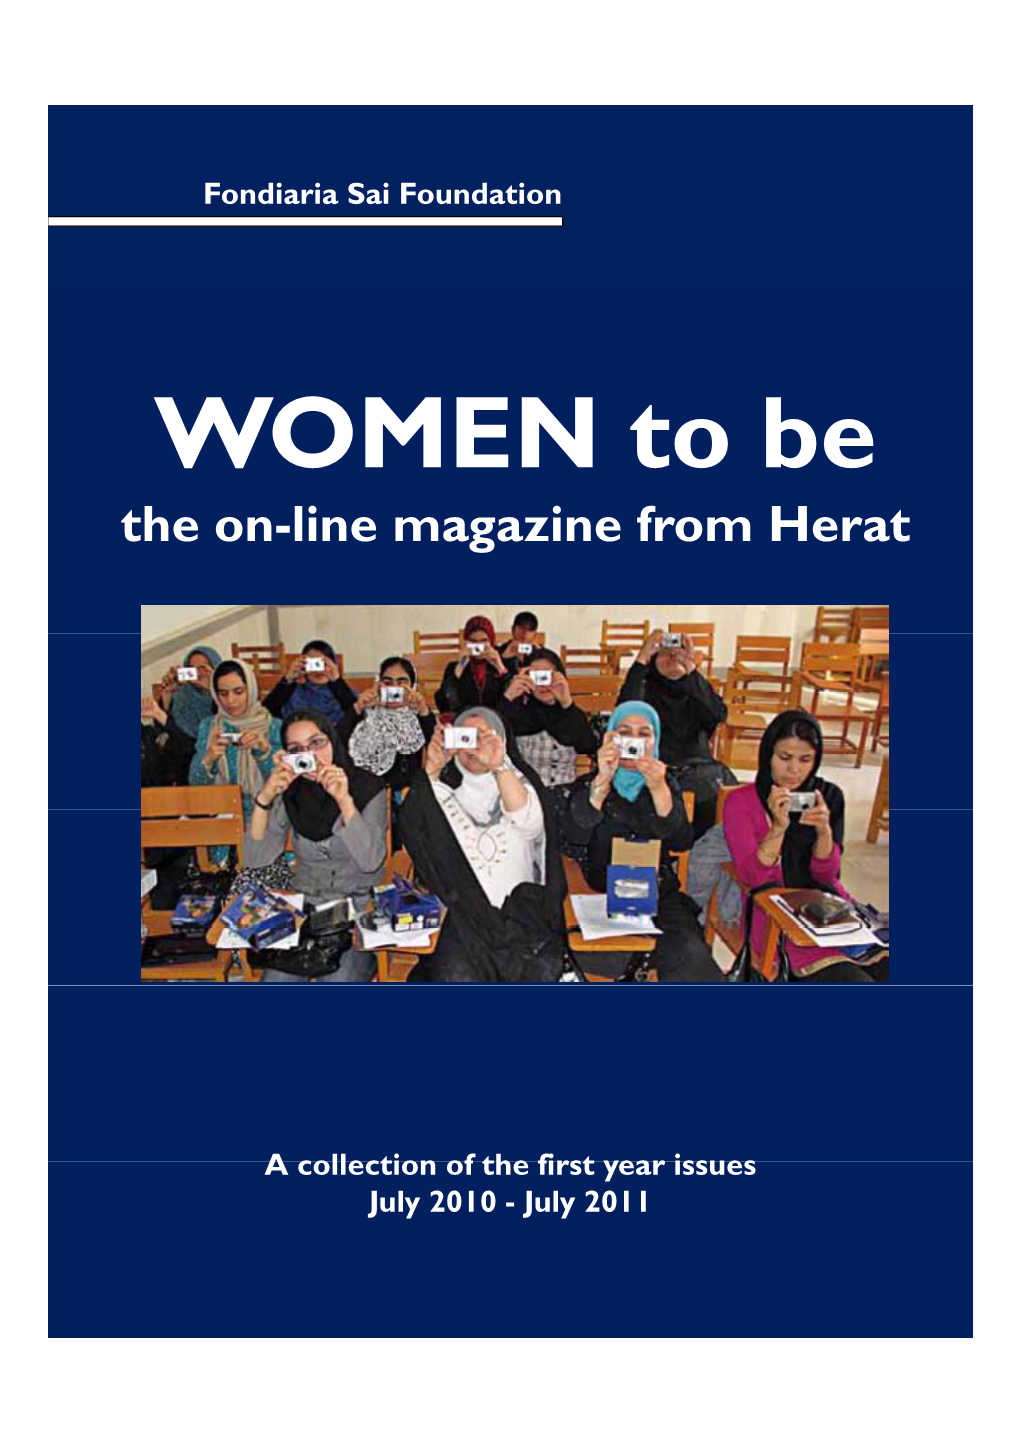 WOMEN to Be the On-Line Magazine from Herat